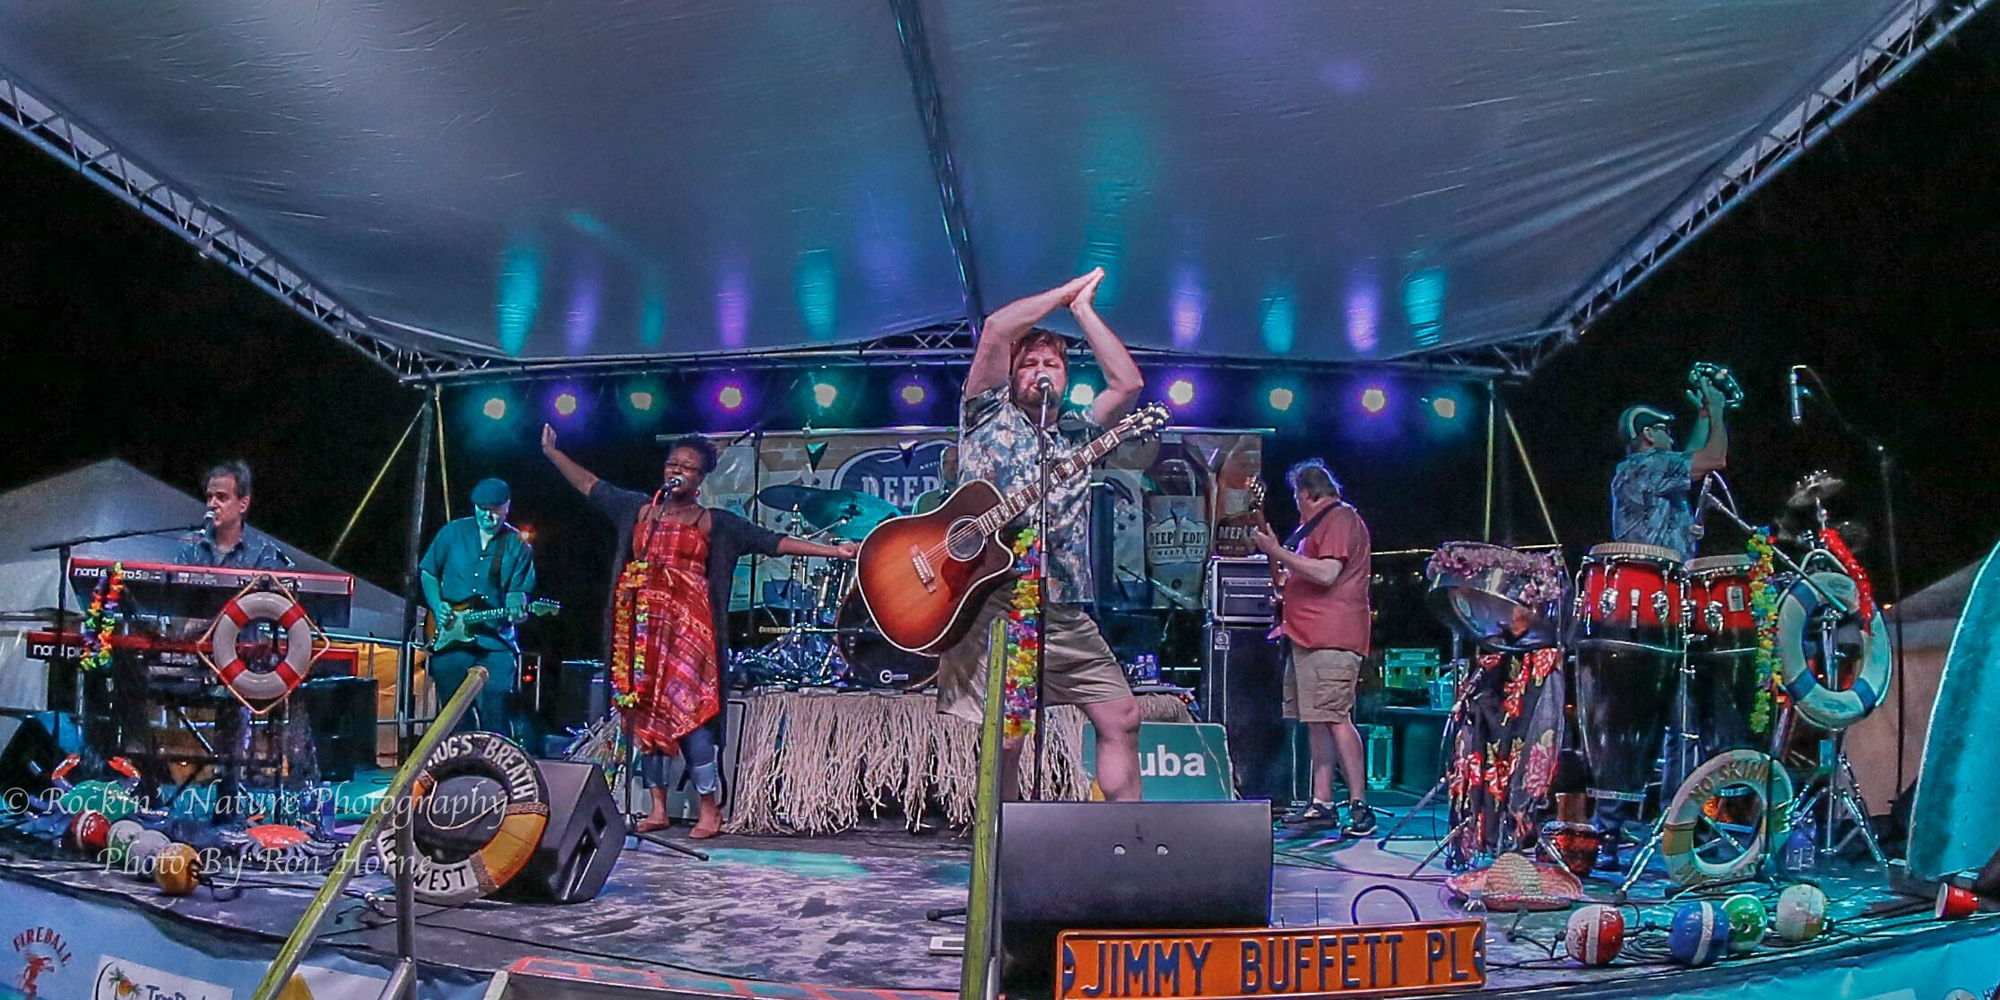 Concert: A1A Jimmy Buffet Tribute Band promotional image